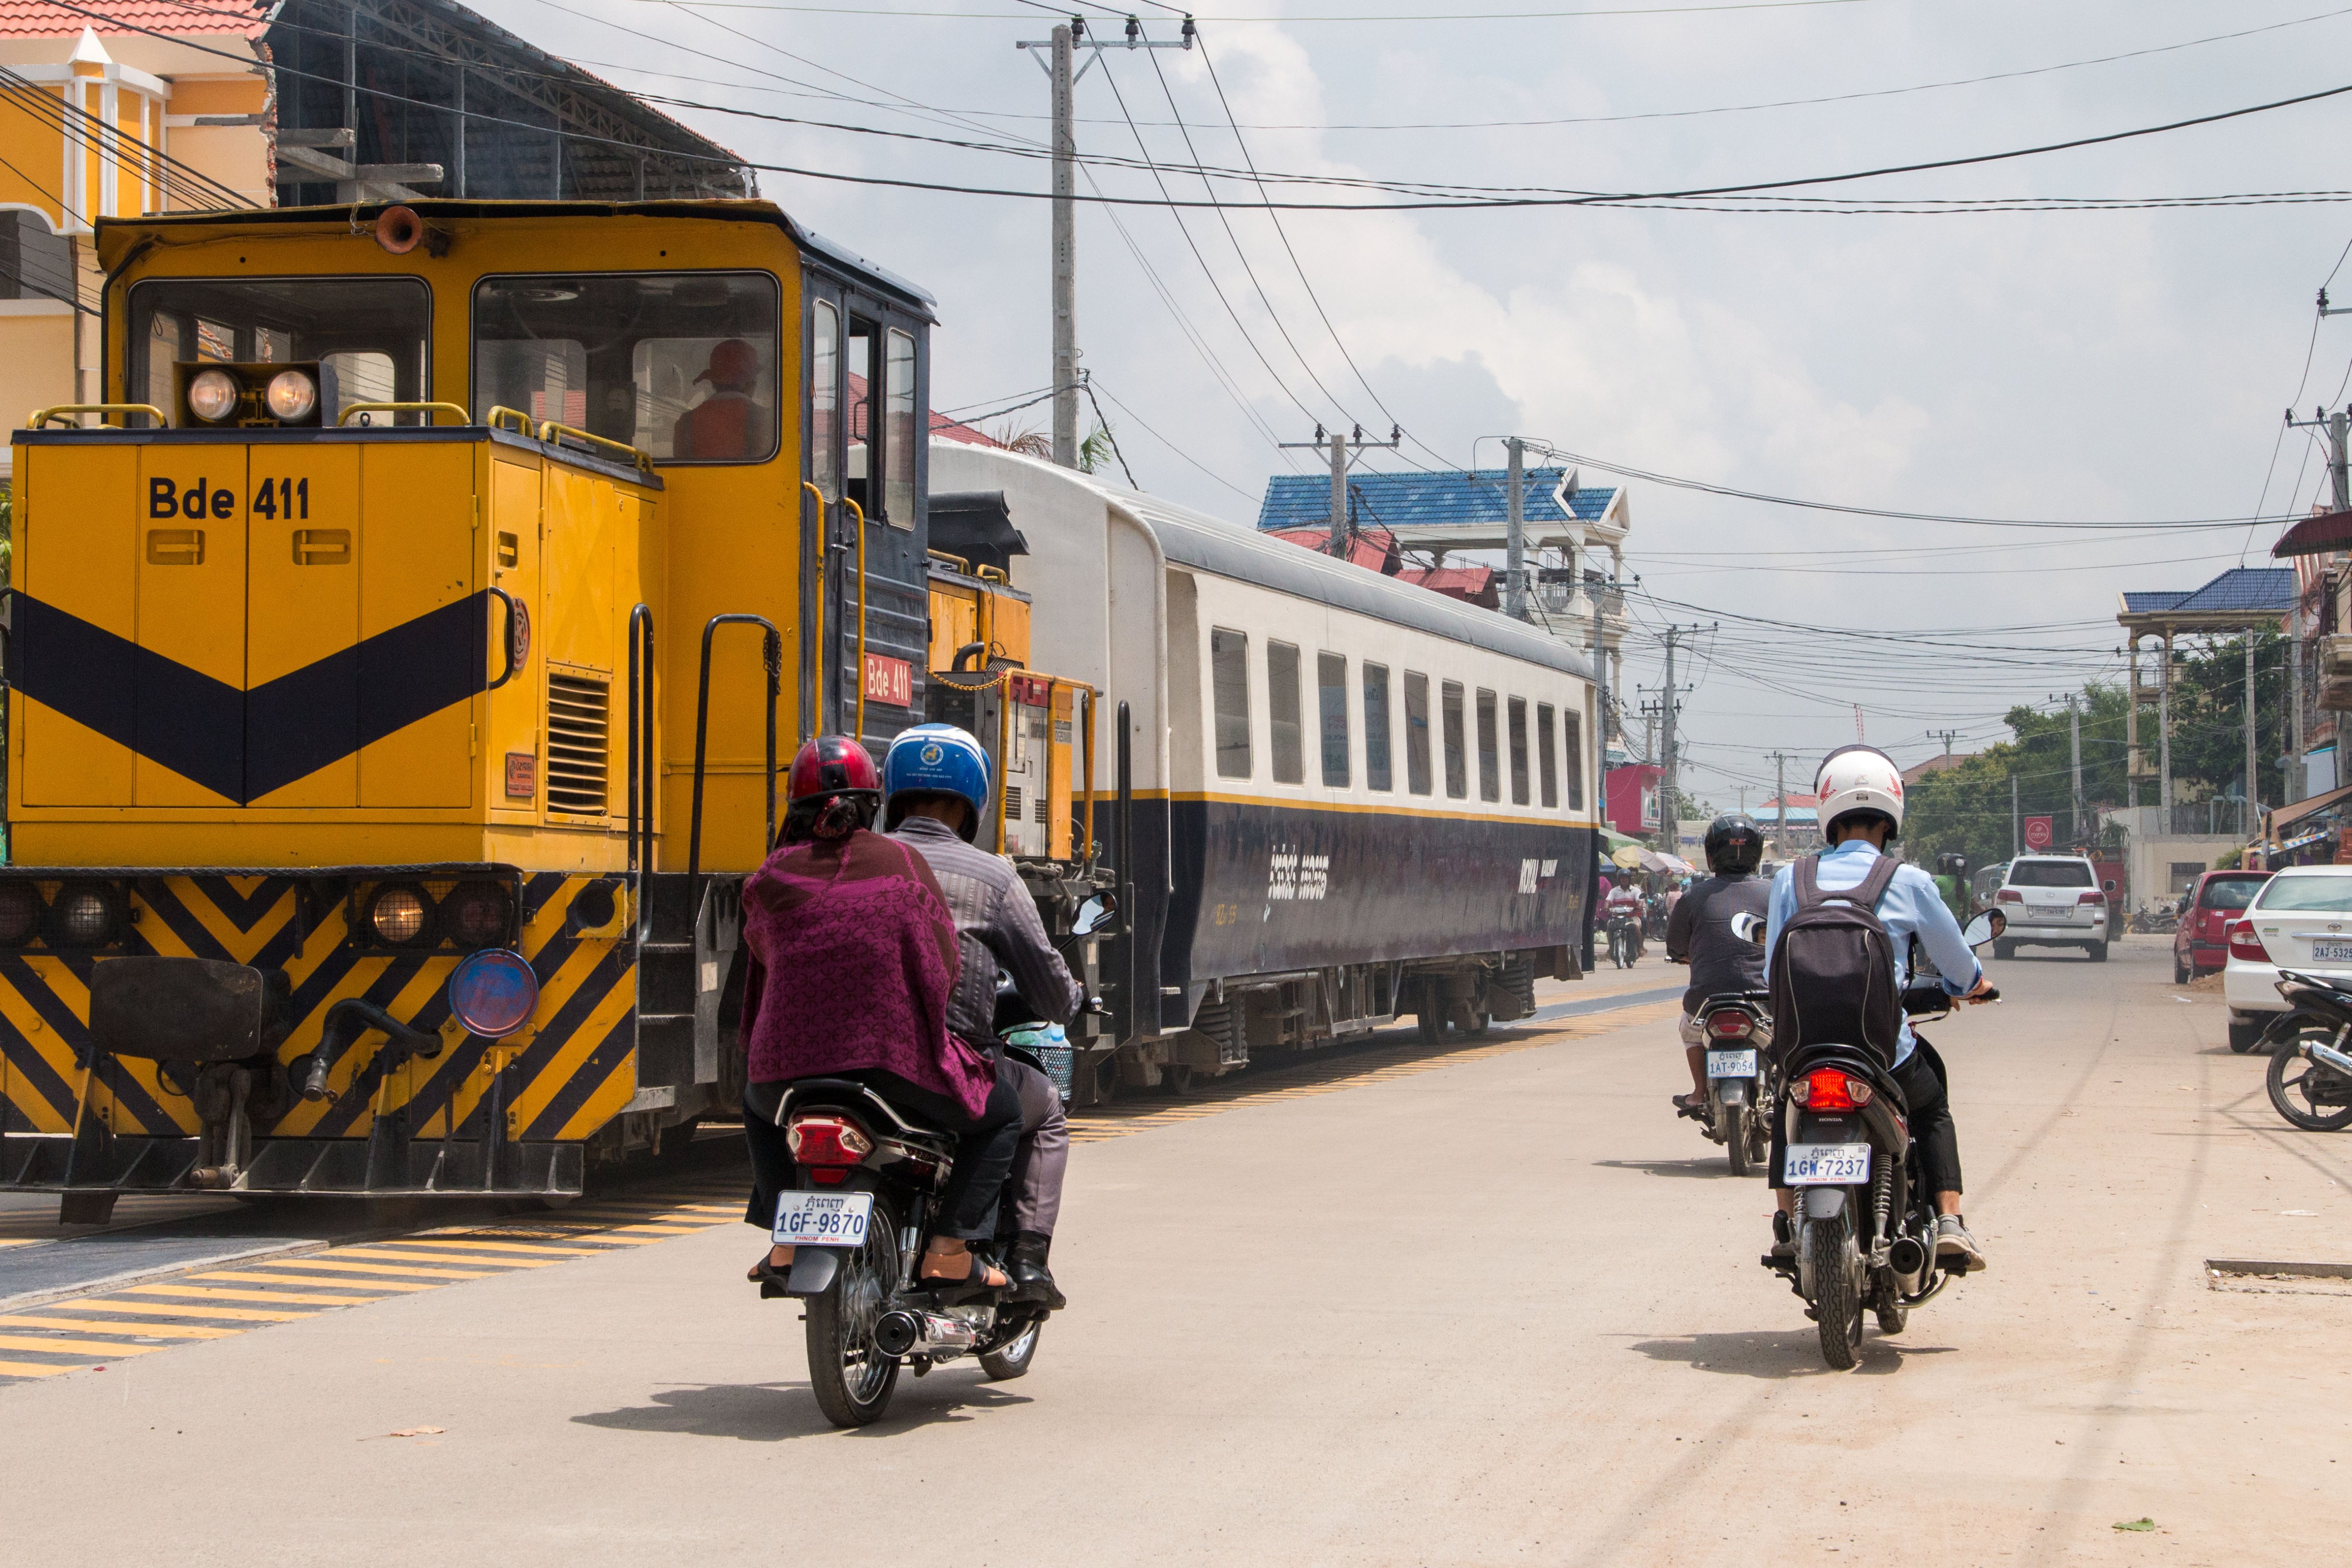 Road space is at a premium as the train shuttles to the airport in Phnom Penh. (Eli Meixler—Time)